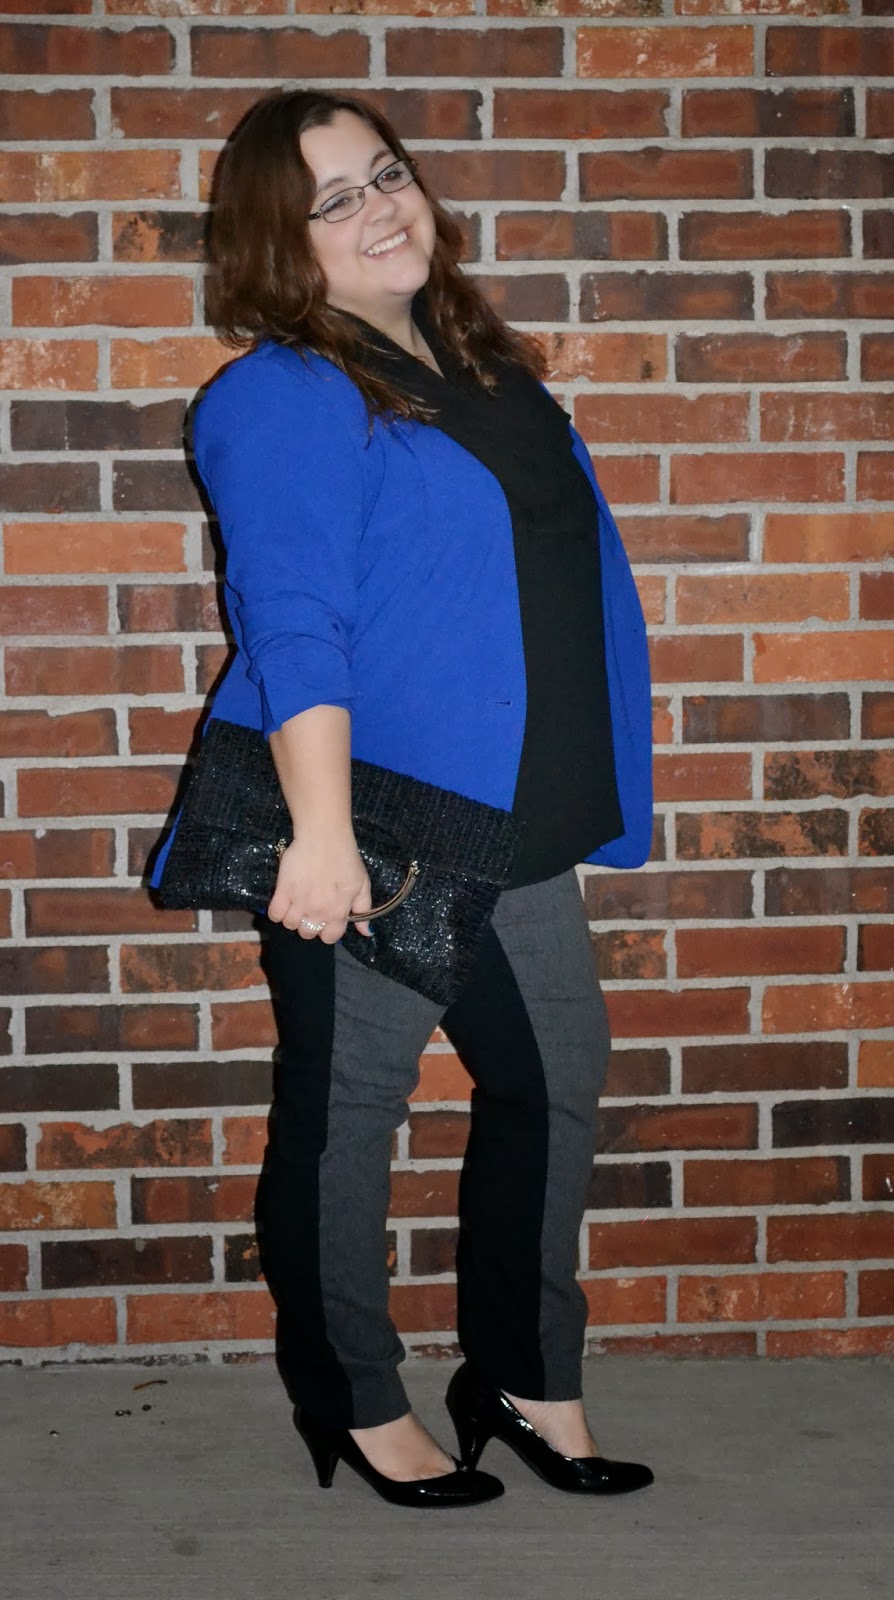 The-Global-Dispatch-stylecassentials: Two-Tone and Cobalt